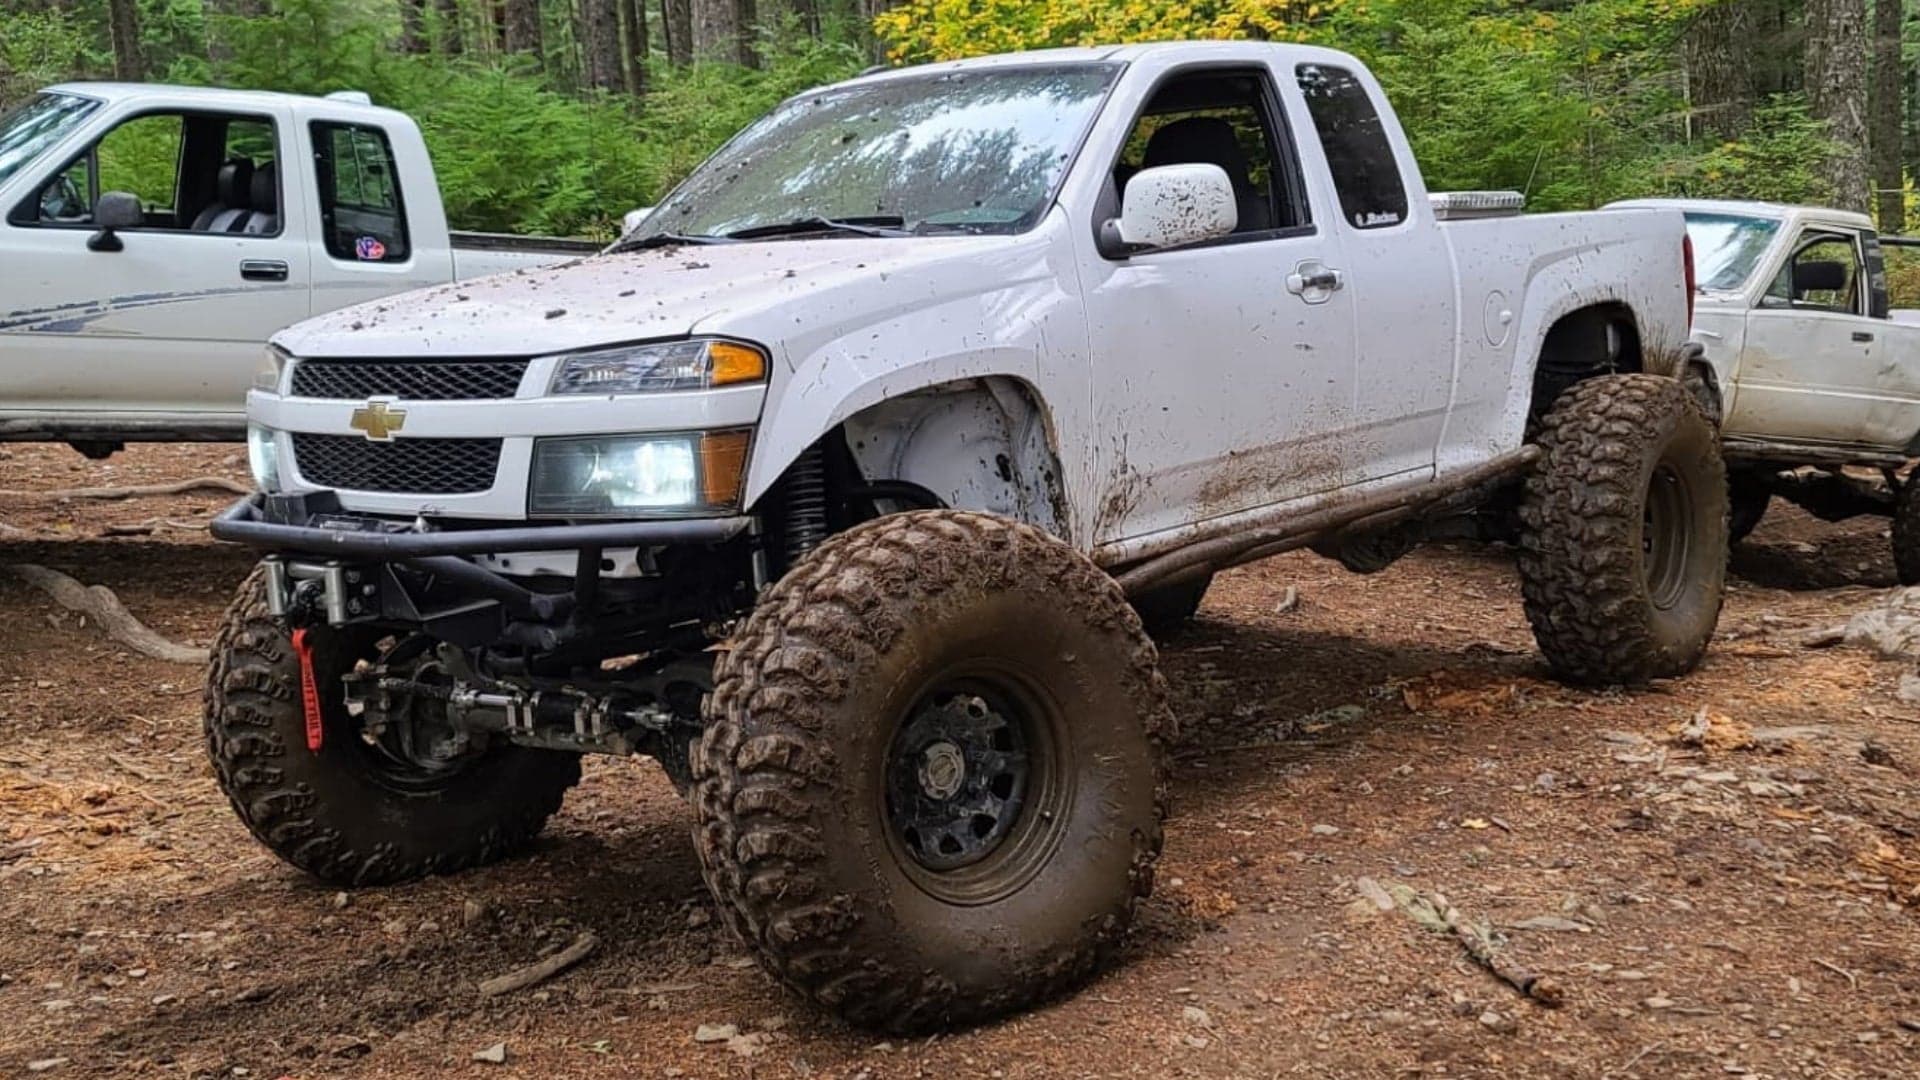 A Turbo Honda K20 Powers This Chevy Colorado With 42-Inch Tires